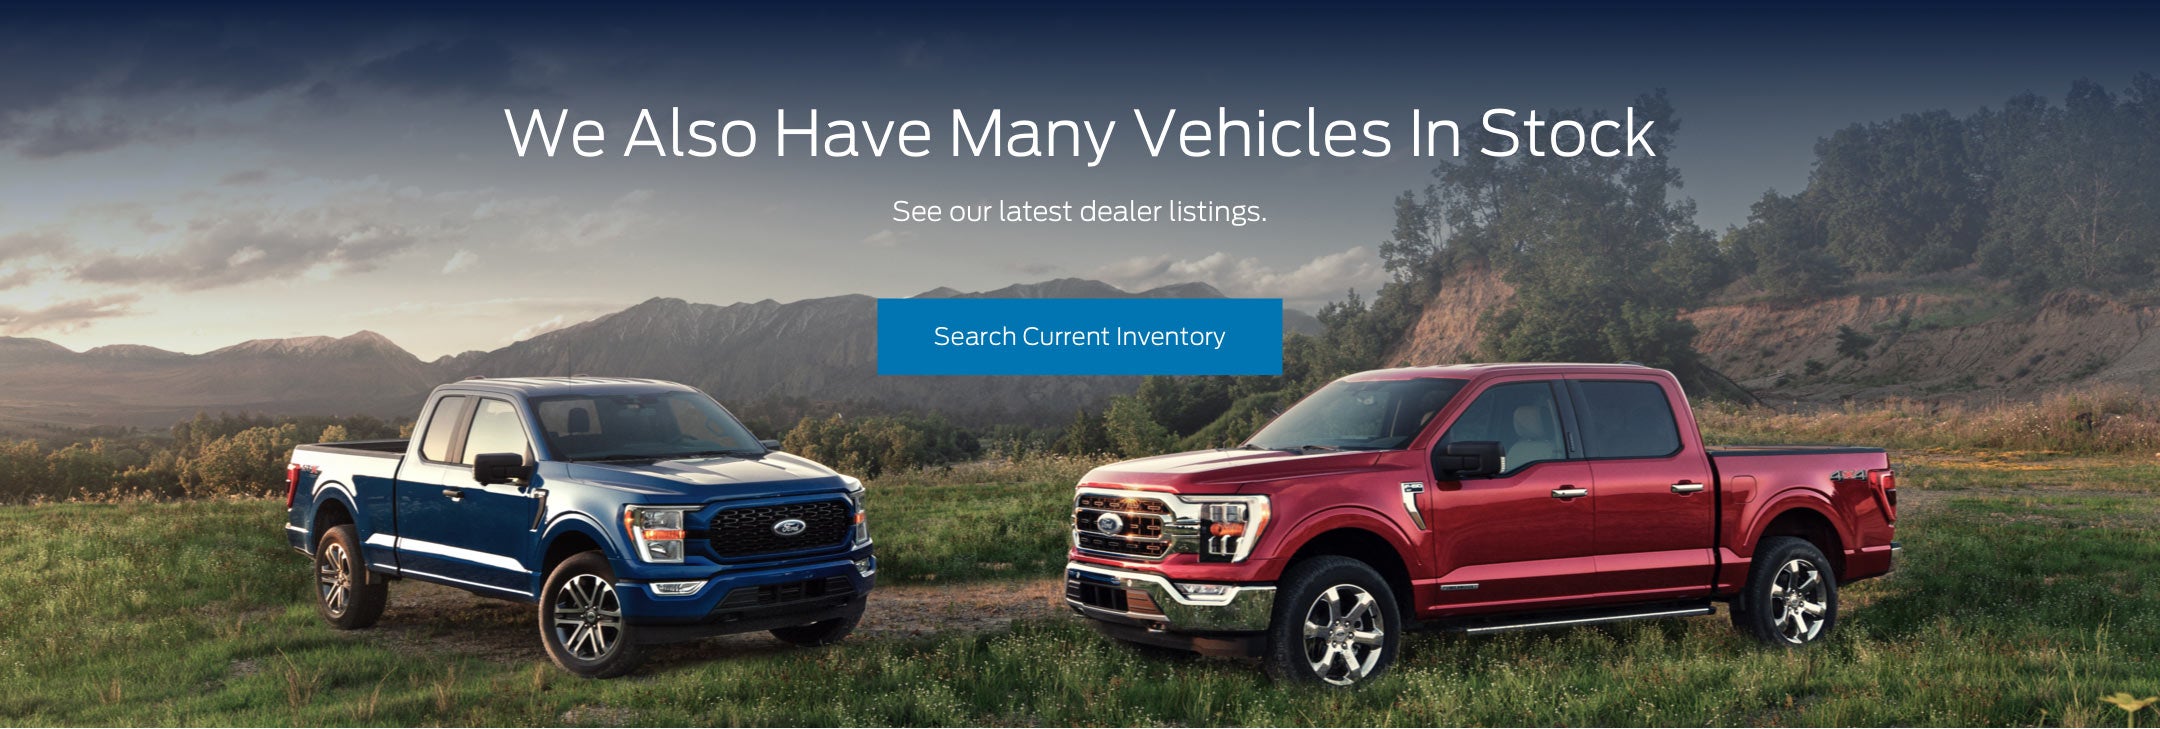 Ford vehicles in stock | Clinton Ford, Inc. in Clinton IN